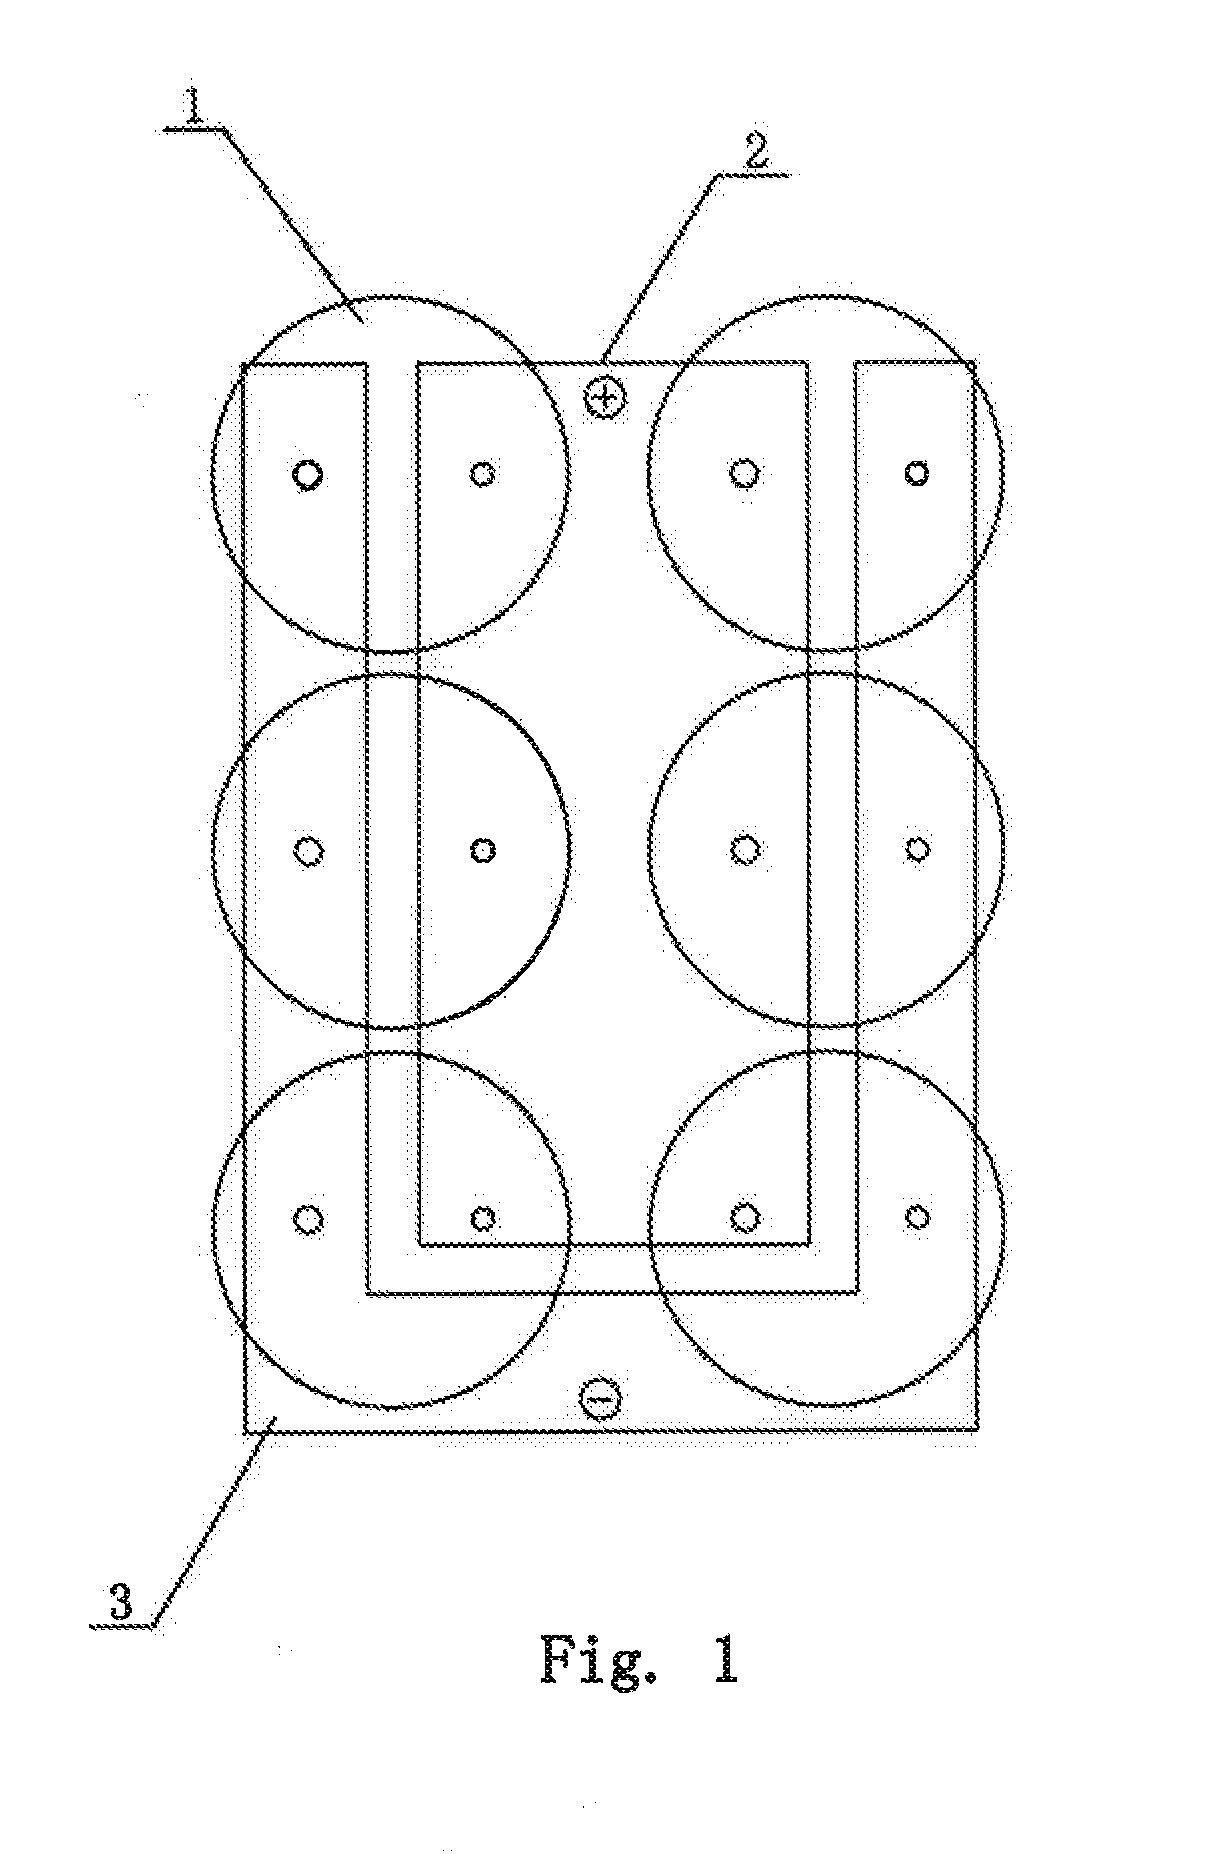 Stacked output structure of capacitive power supply for welding equipment